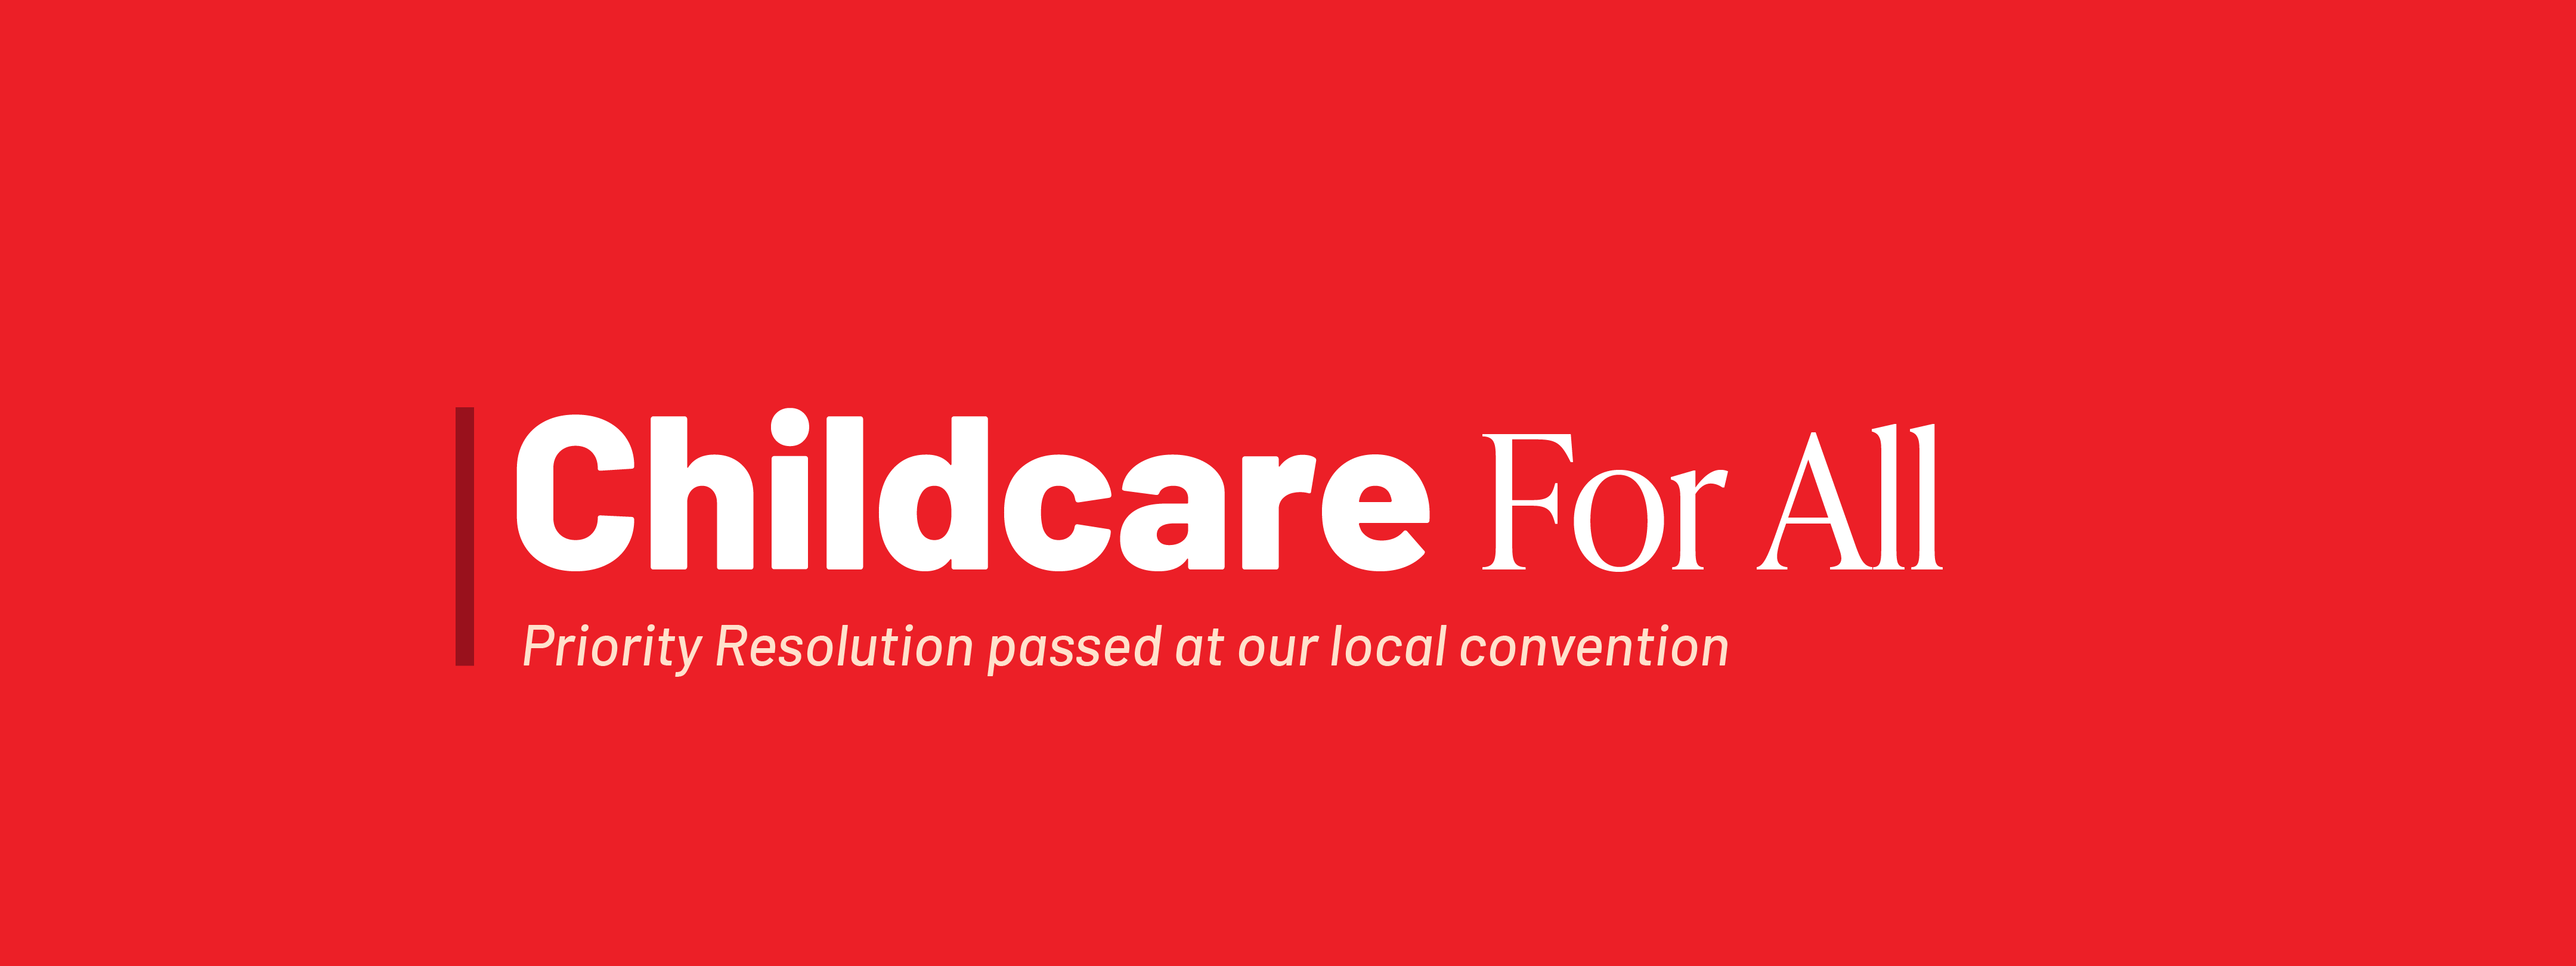 Childcare For All